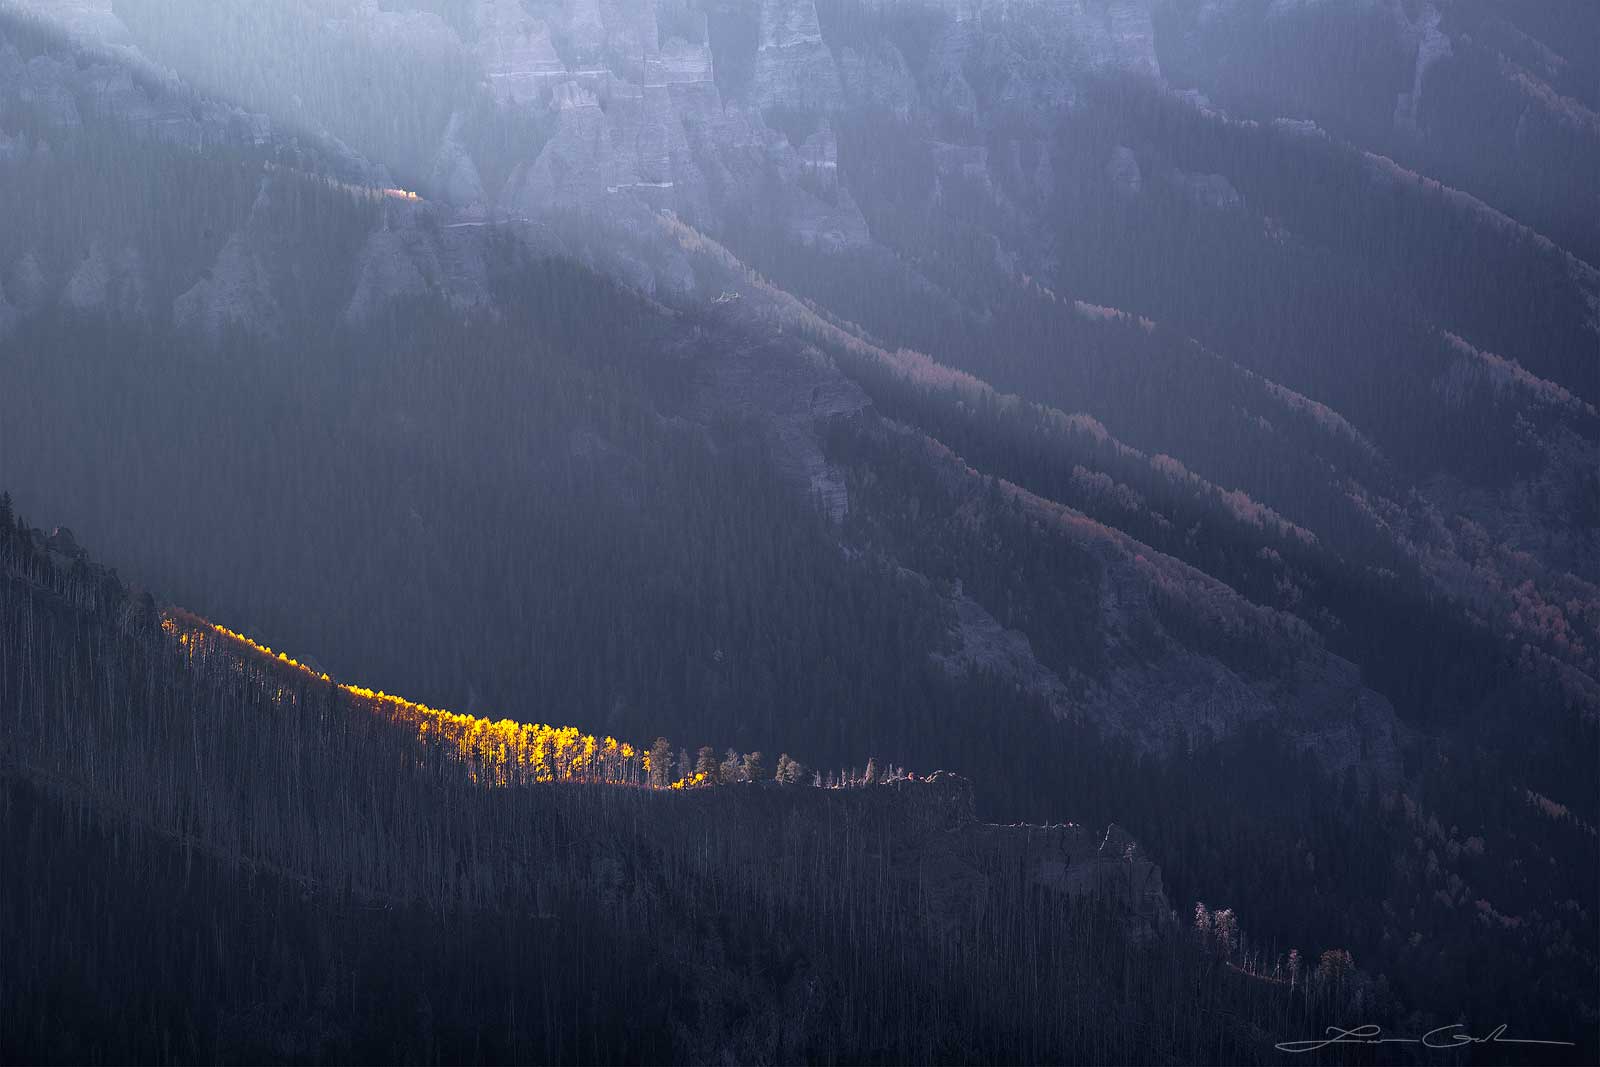 A patch of sunlit aspens against a darker Colorado mountains background